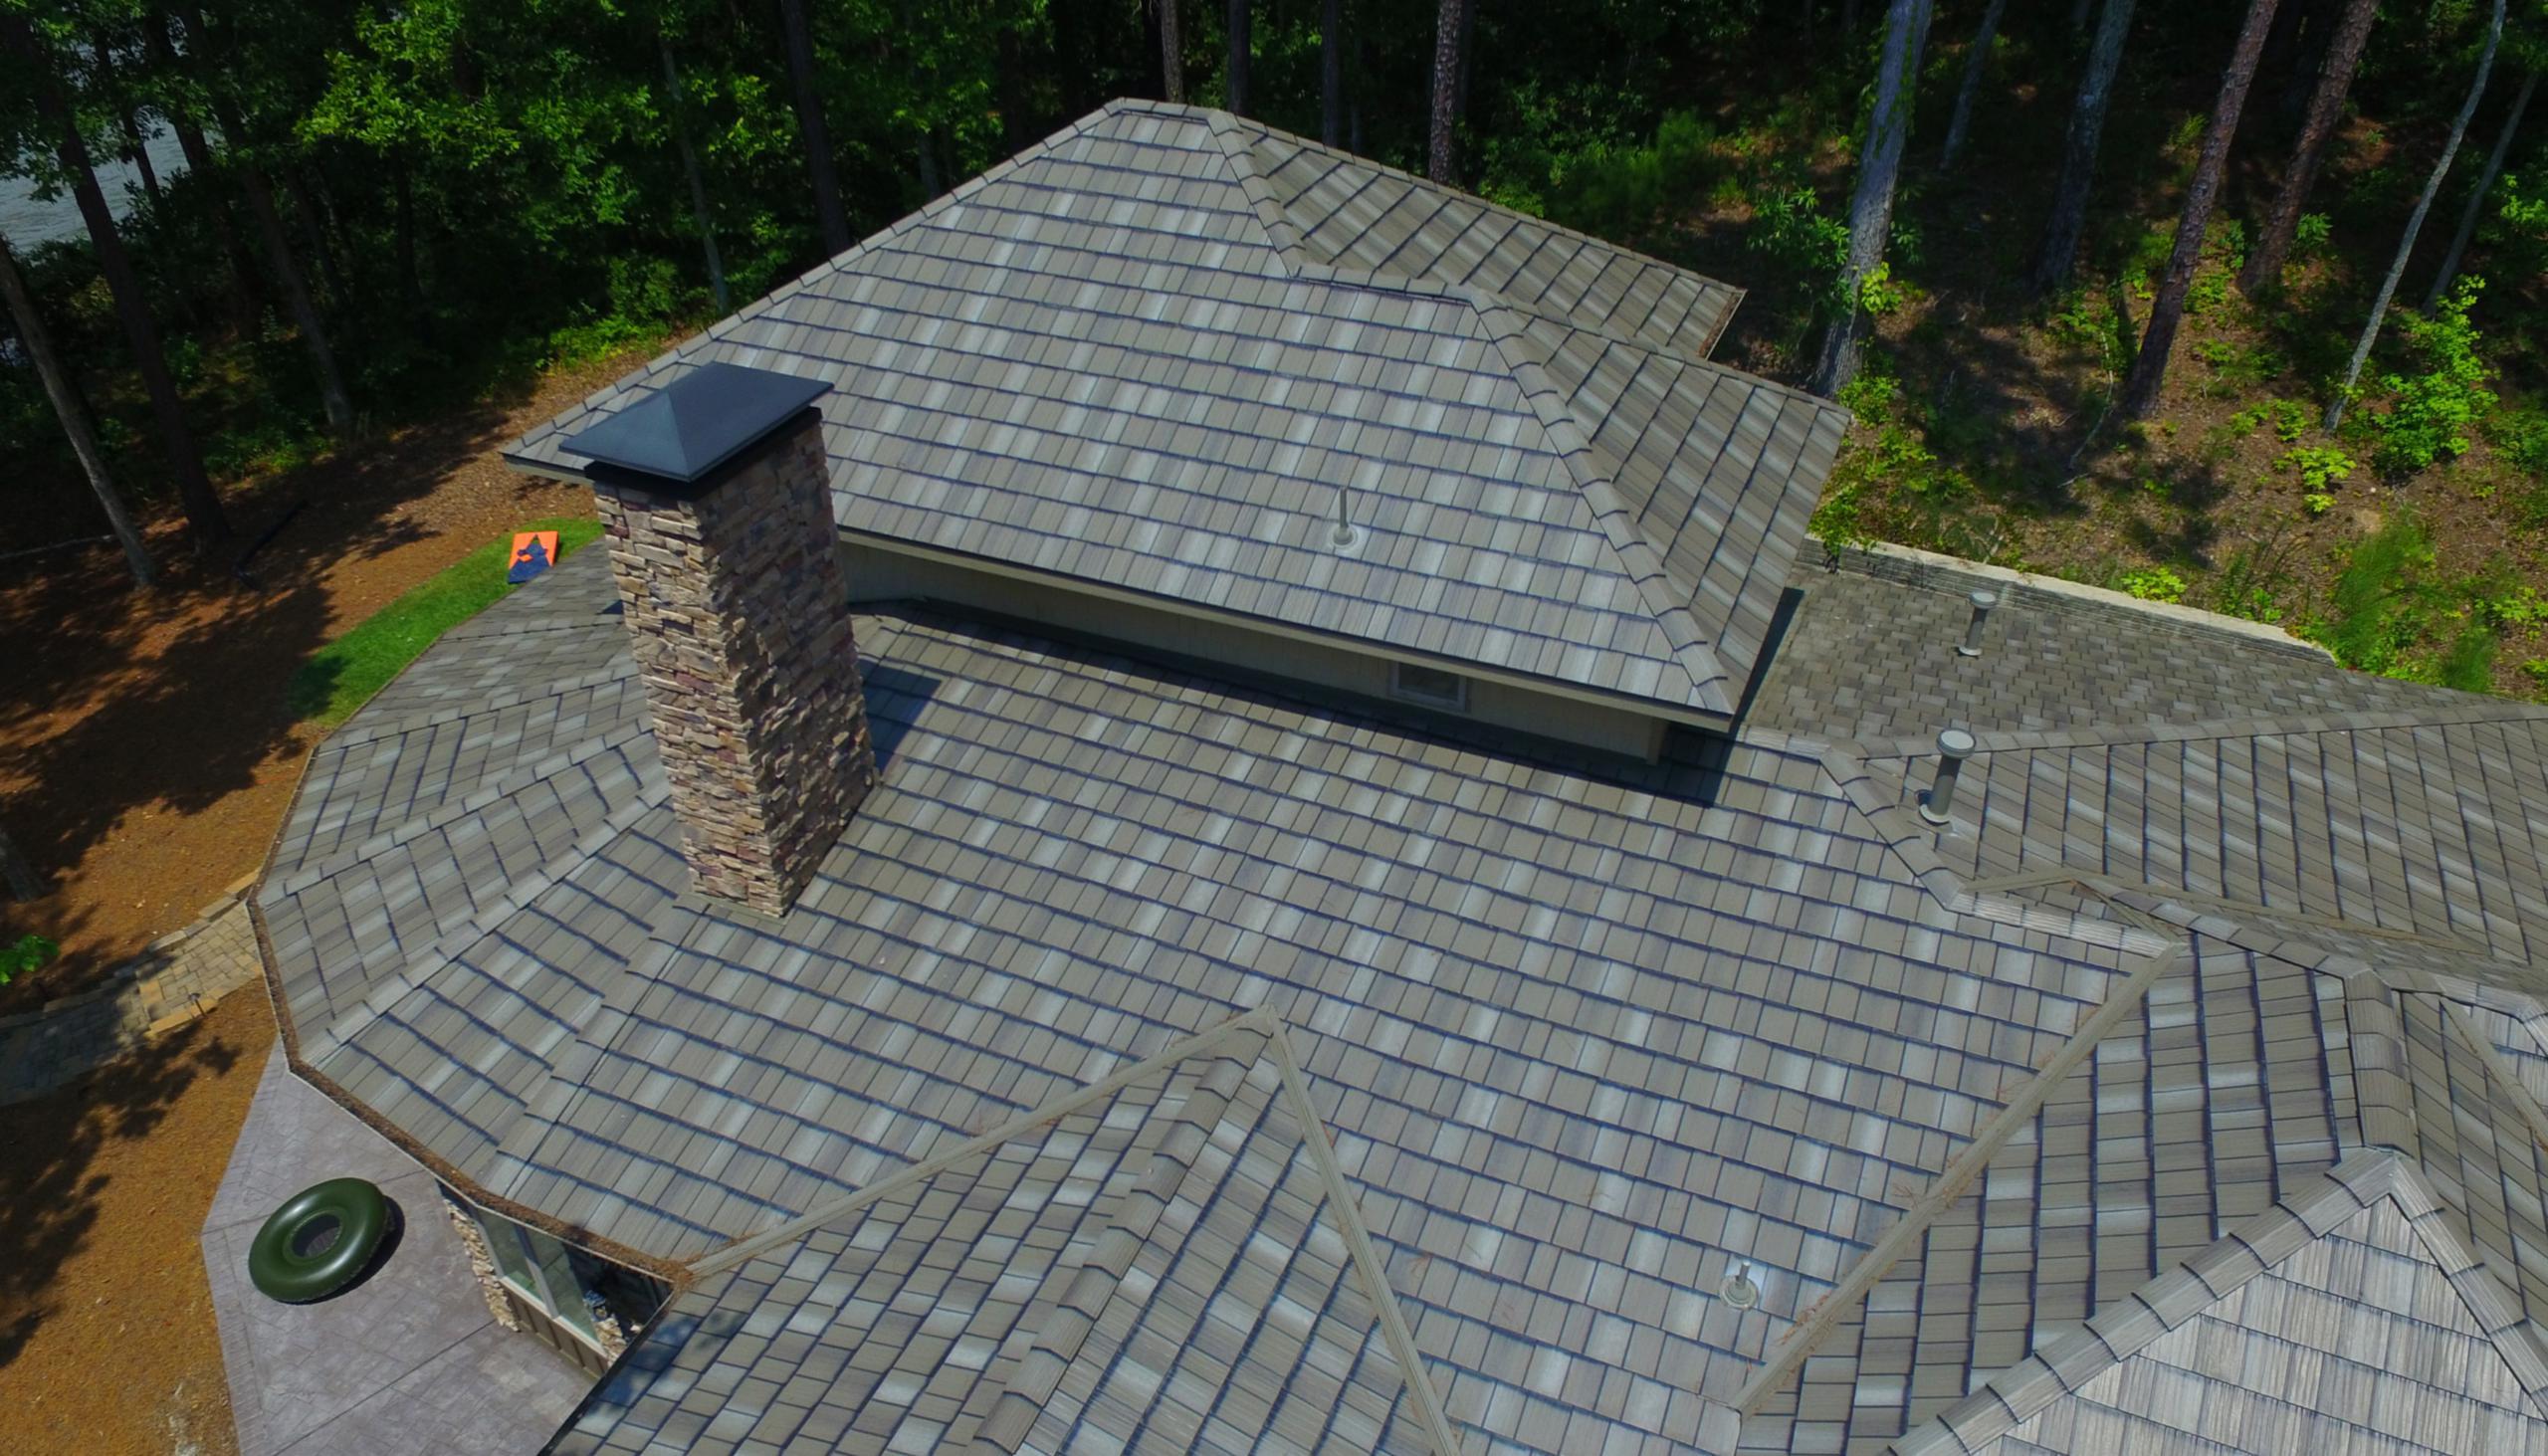 Arrowline Enhanced Shake T-Tone Blend Roofing was selected for this home in a rural wooded area in Alabama to give the roof a weathered look to compliment the environment surrounding the home.